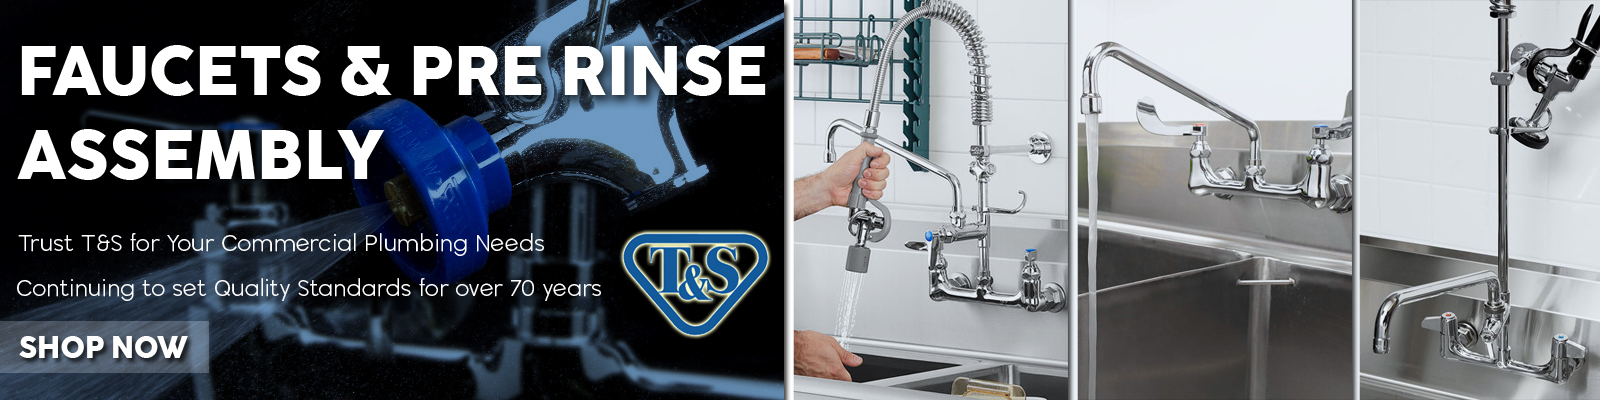 T&S Commercial Faucets, T&S Commercial Plumbing, Pre Rinse Faucets